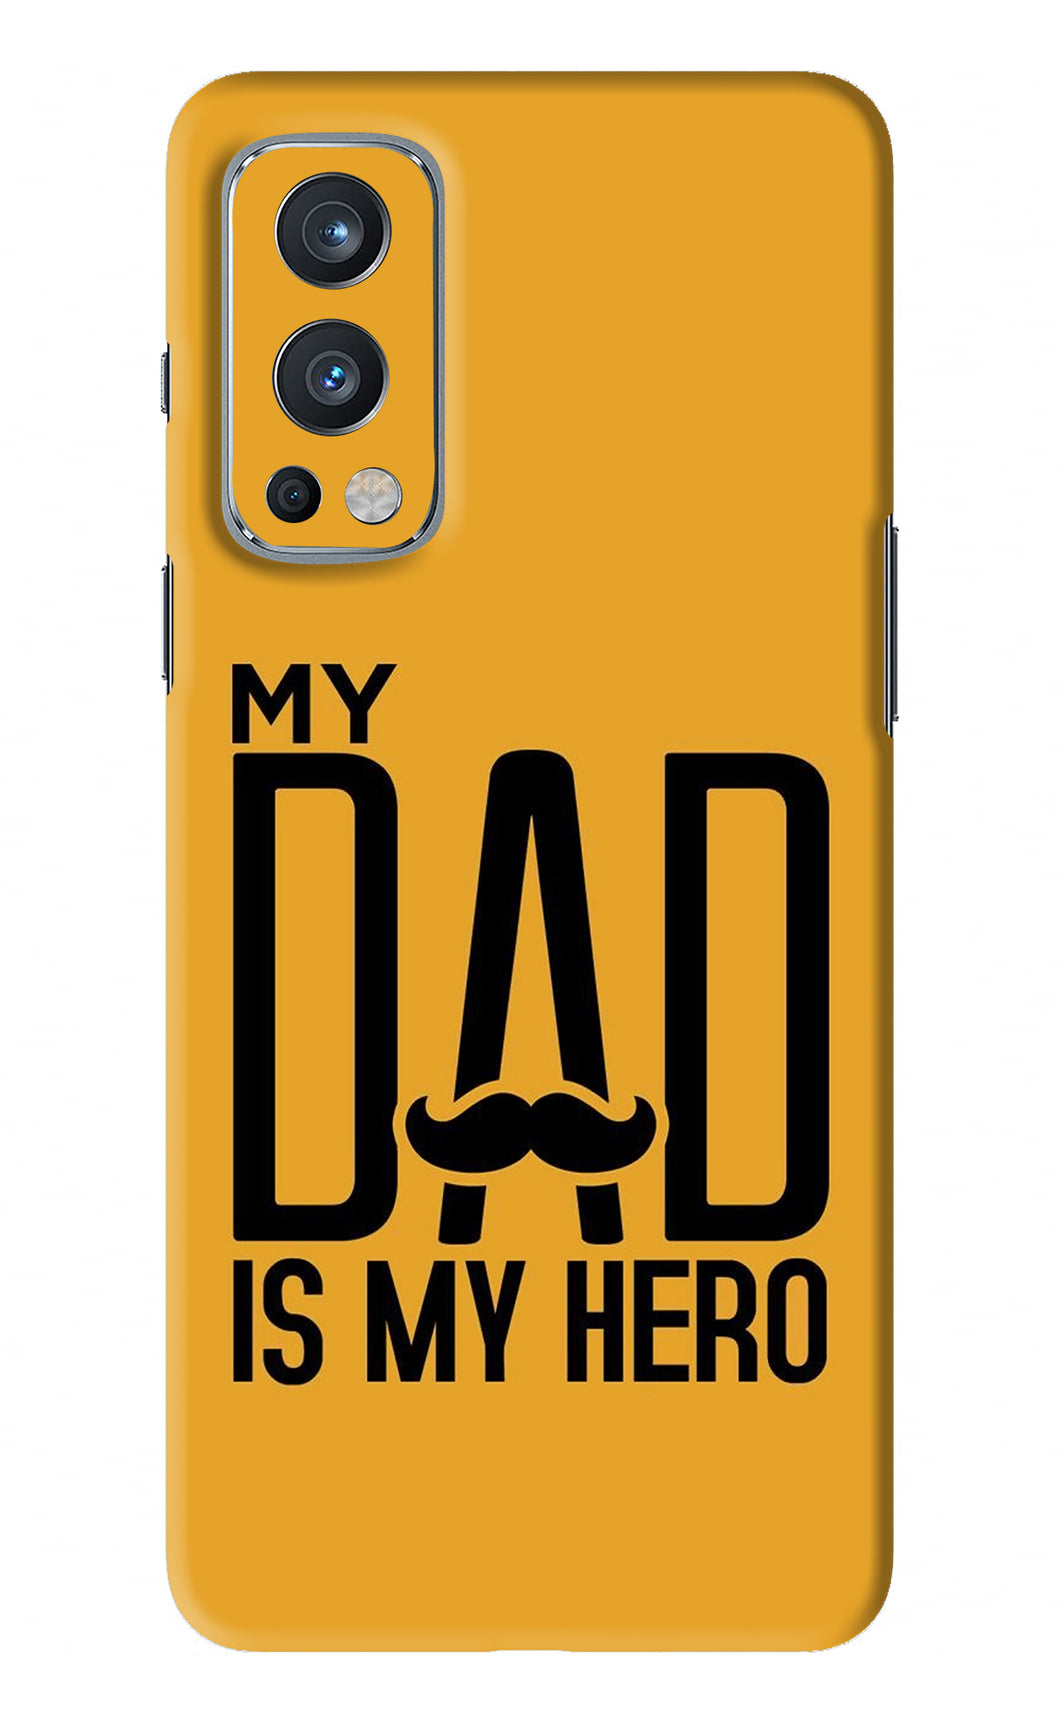 My Dad Is My Hero Oneplus Nord 2 Back Skin Wrap